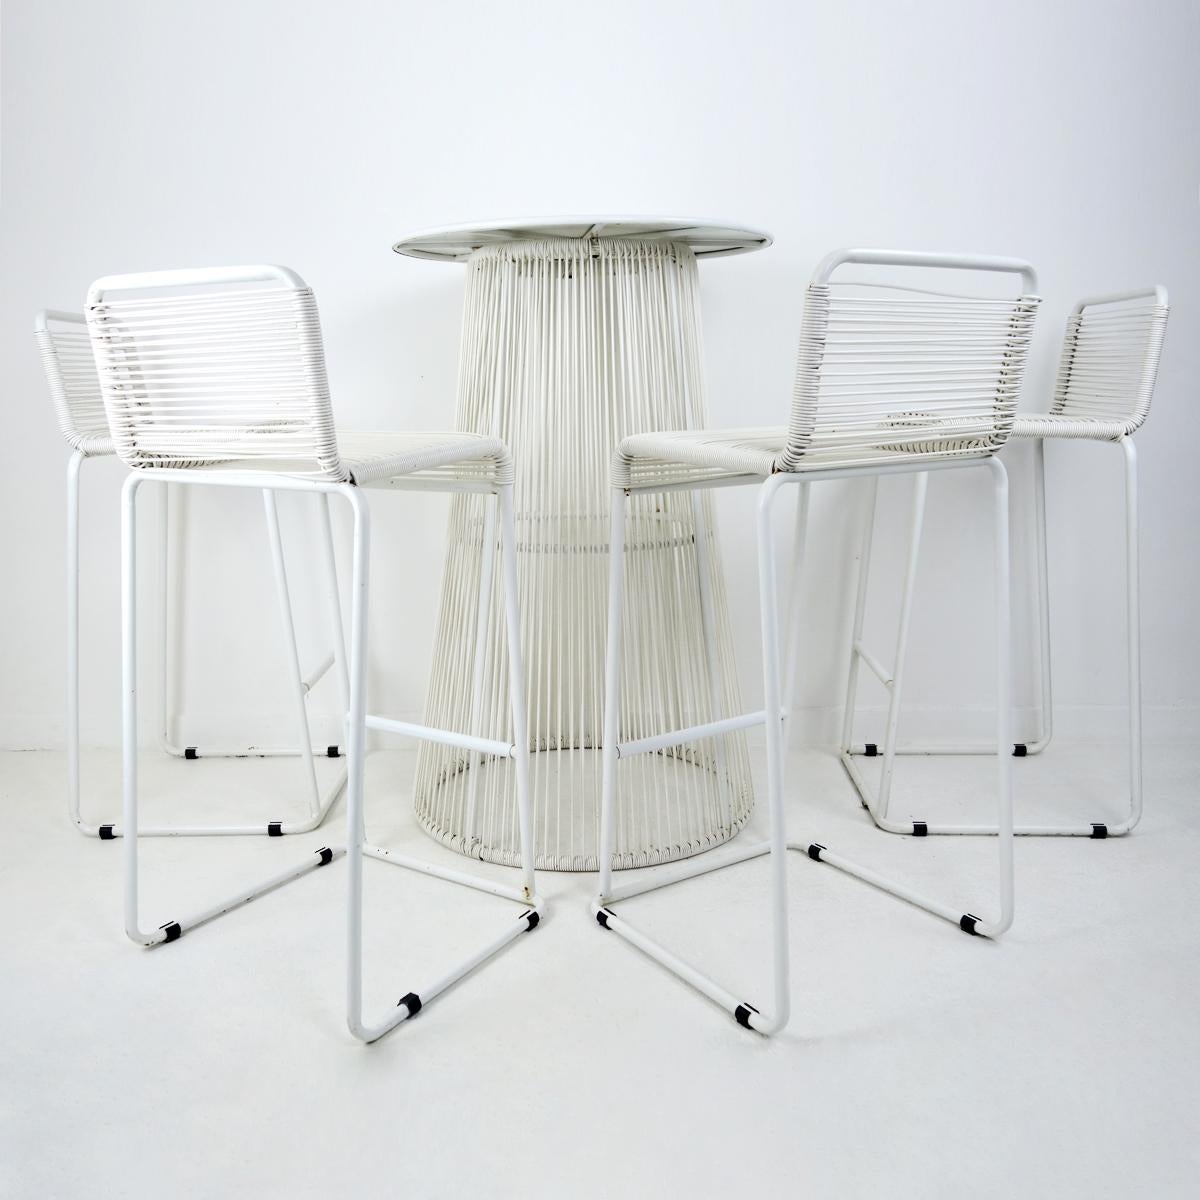 Stunning white patio set consisting of a high table and 4 high chairs / bar stools. They are made of steel and rubber cord.
Perfect for your breakfast nook or patio.
The dimensions mentioned apply for the high chairs.
The table is 70 cm / 27.3